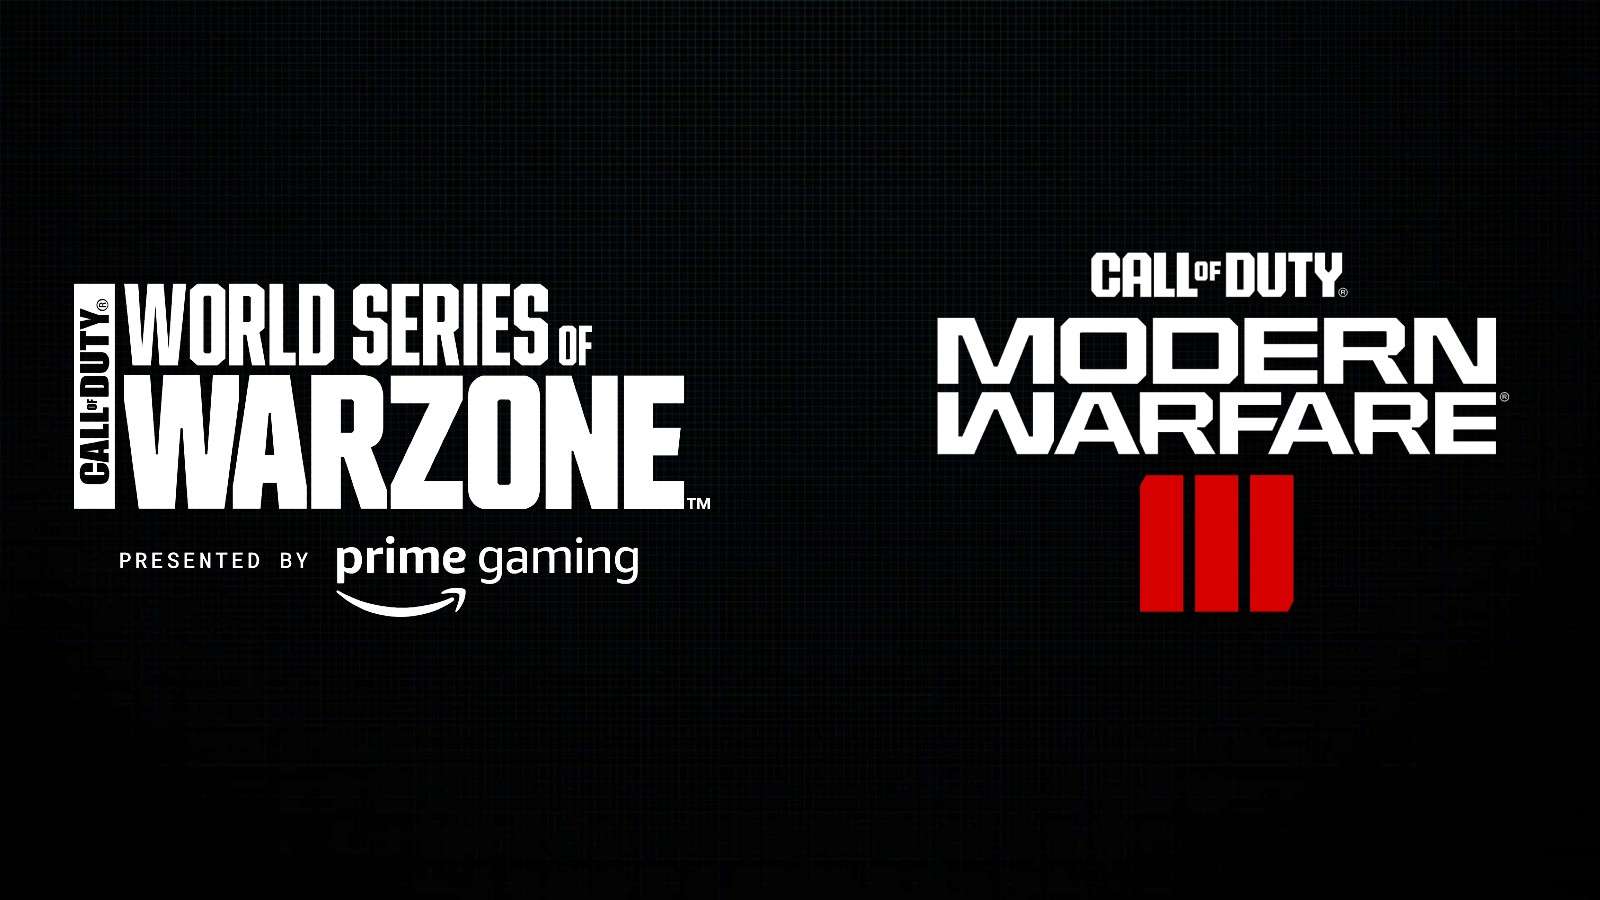 Modern Warfare 3 and World Series of Warzone crossover